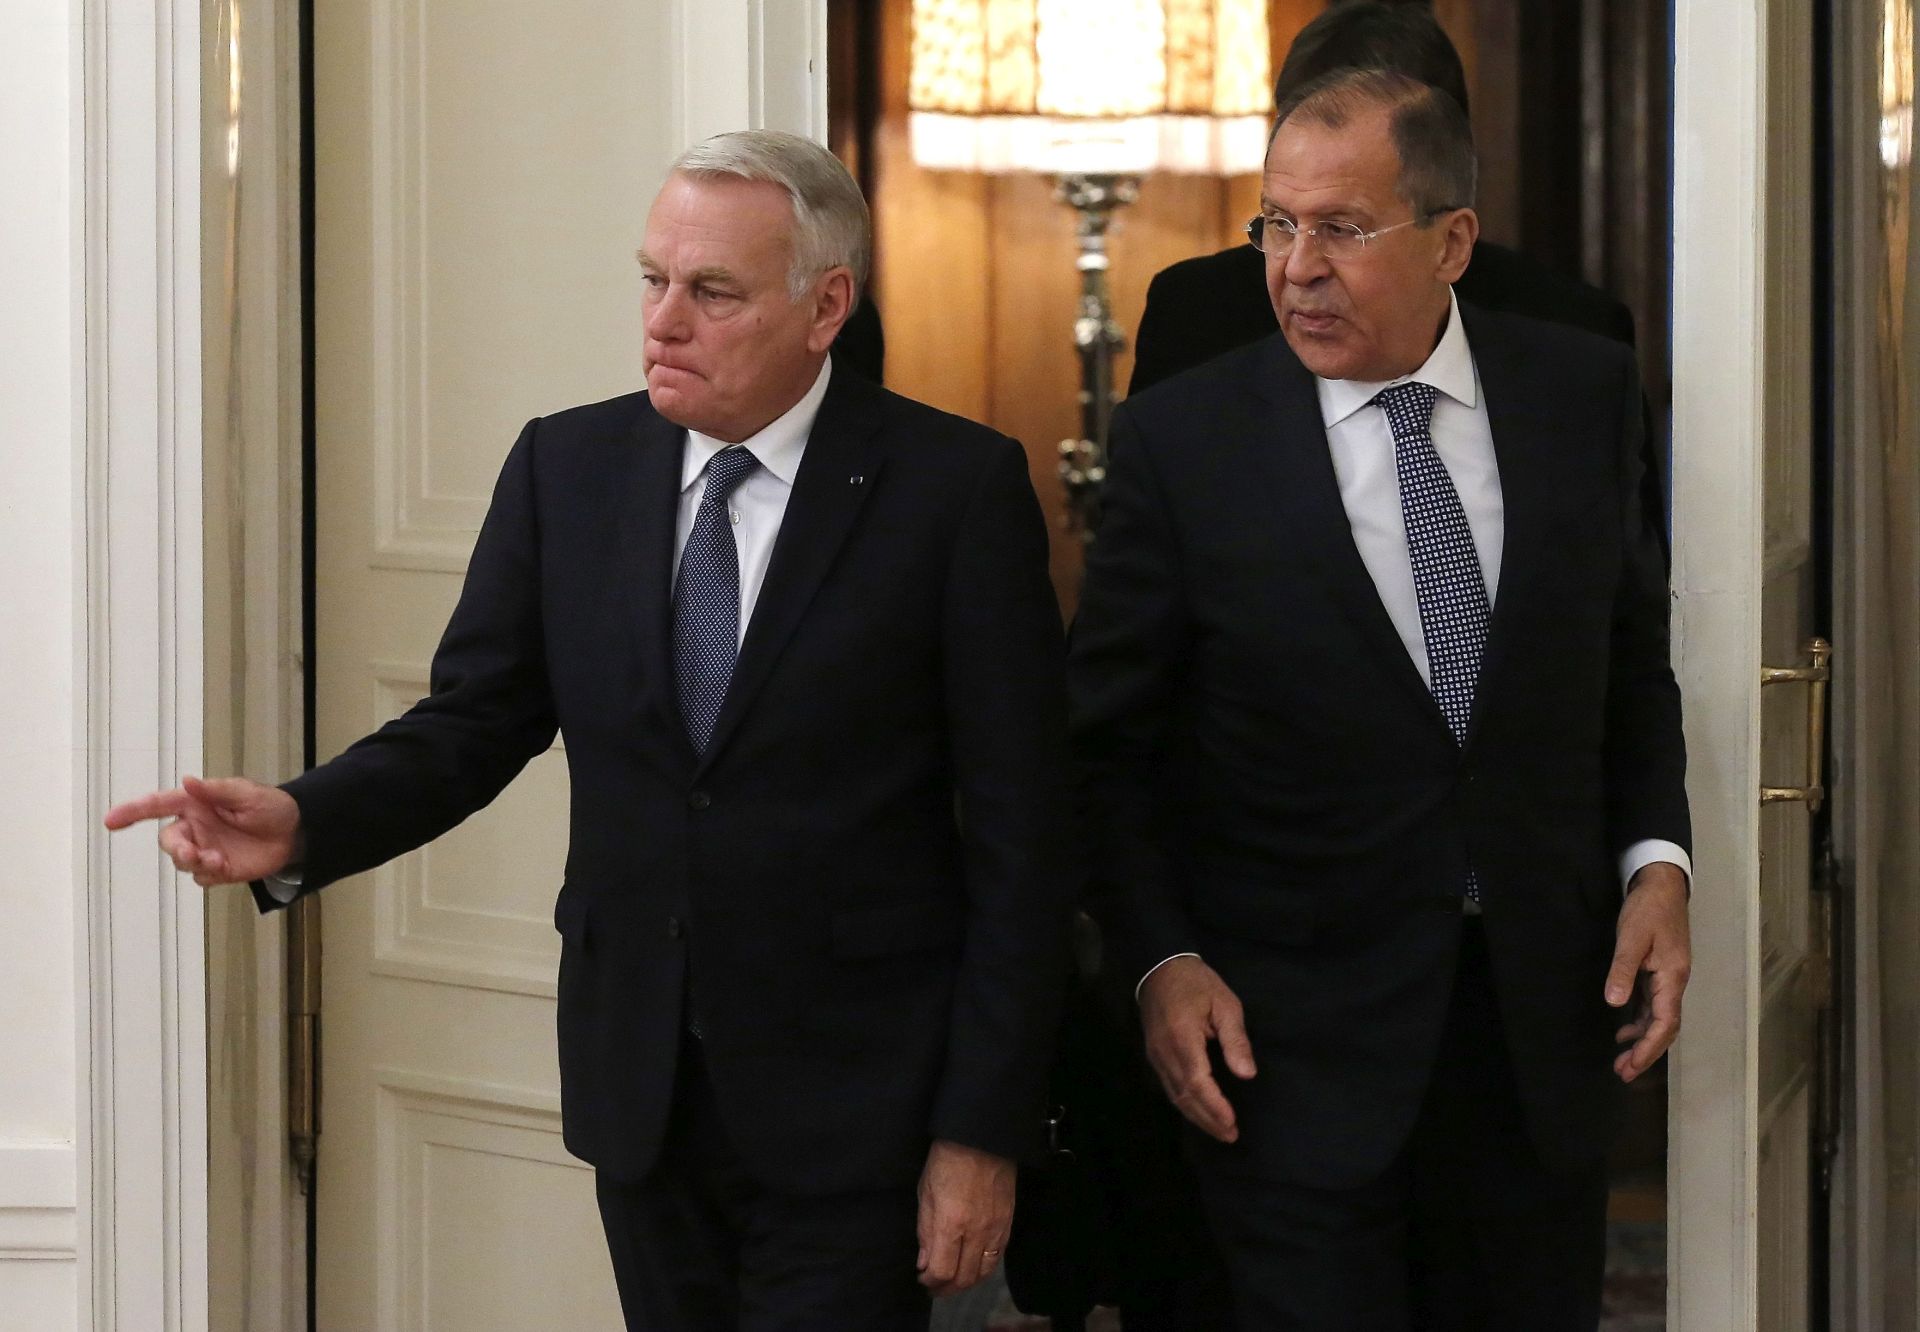 epa05572882 Russian Foreign minister Sergei Lavrov (R) enters a hall with French Foreign Minister Jean-Marc Ayrault (L), during their meeting in Moscow, Russia, 06 October 2016.  EPA/SERGEI ILNITSKY